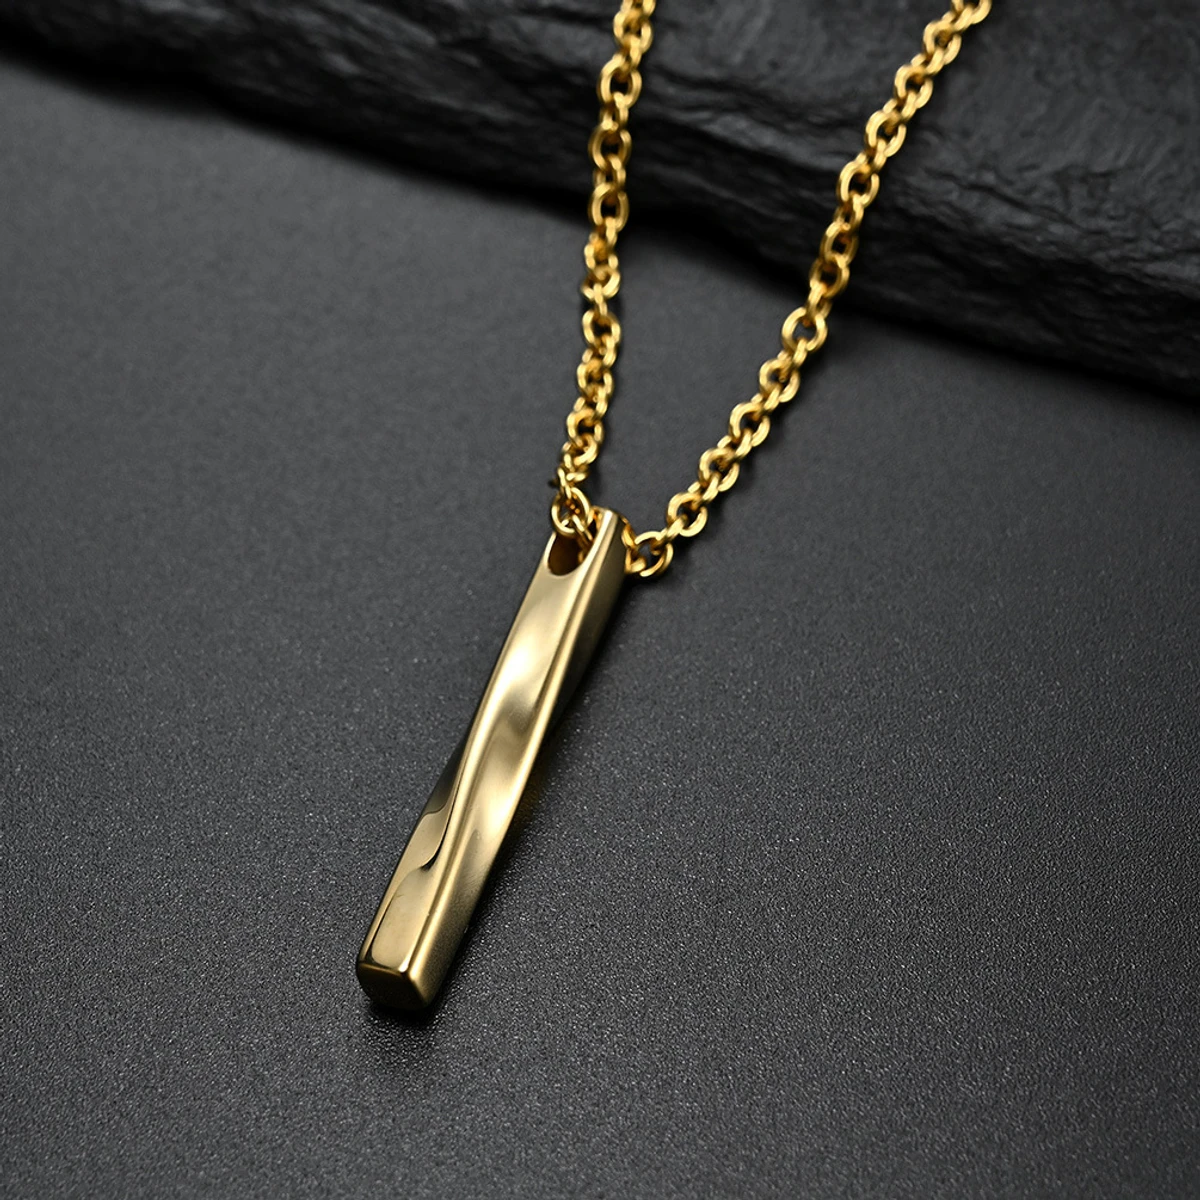 Good Quality Men Fashion Jewellery Stainless Steel Necklaces